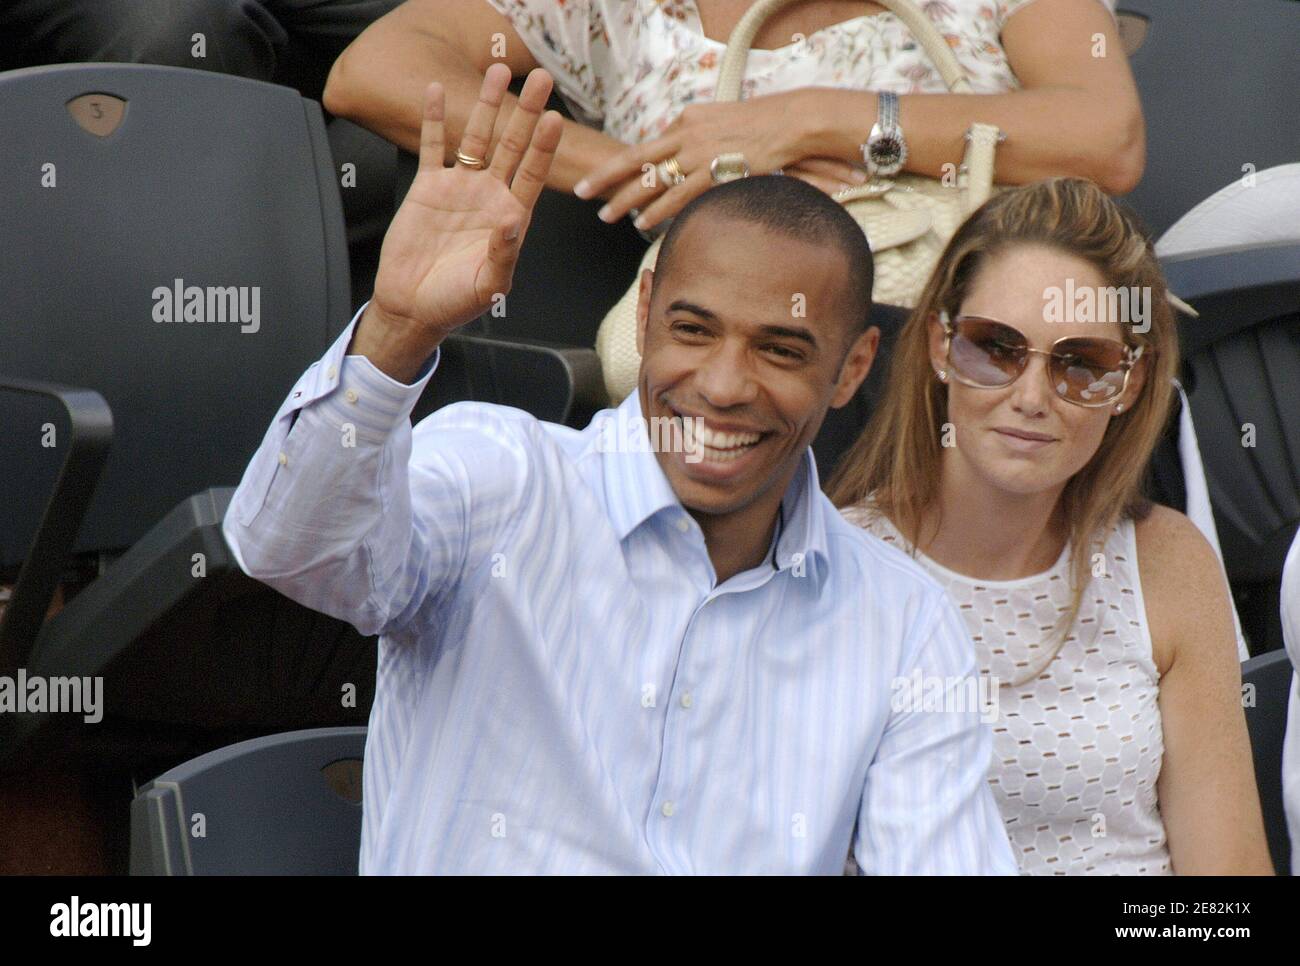 French soccer player Thierry Henry and his wife attend the men's